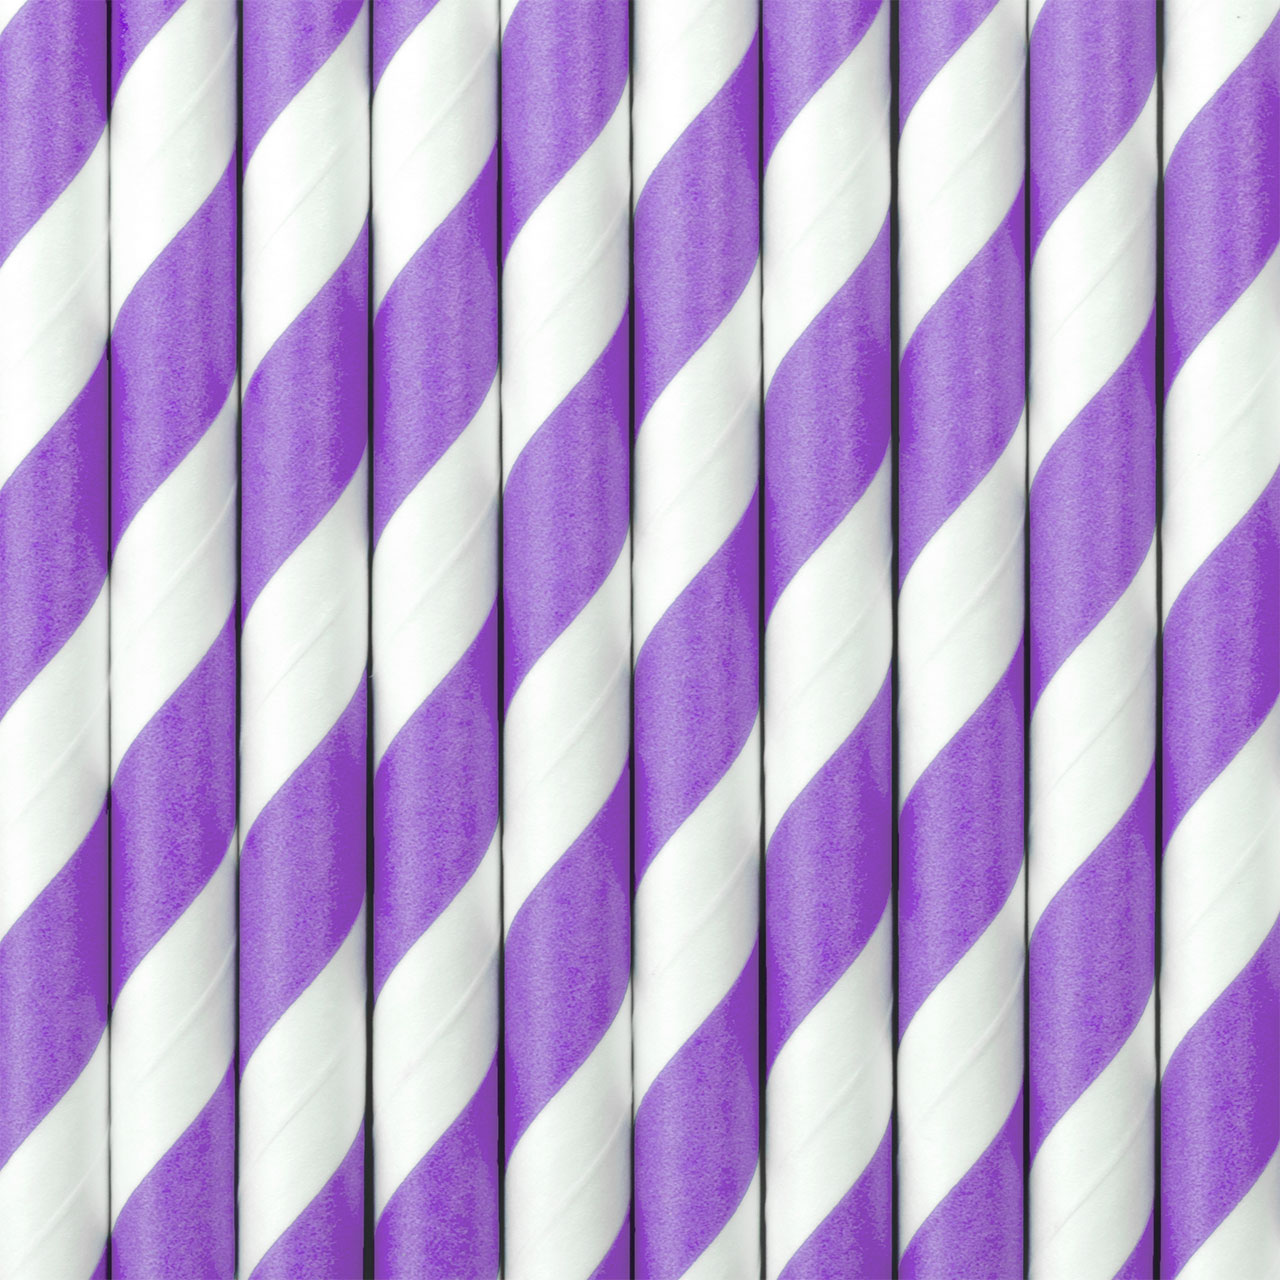 Drinking Straws - Lilac and White